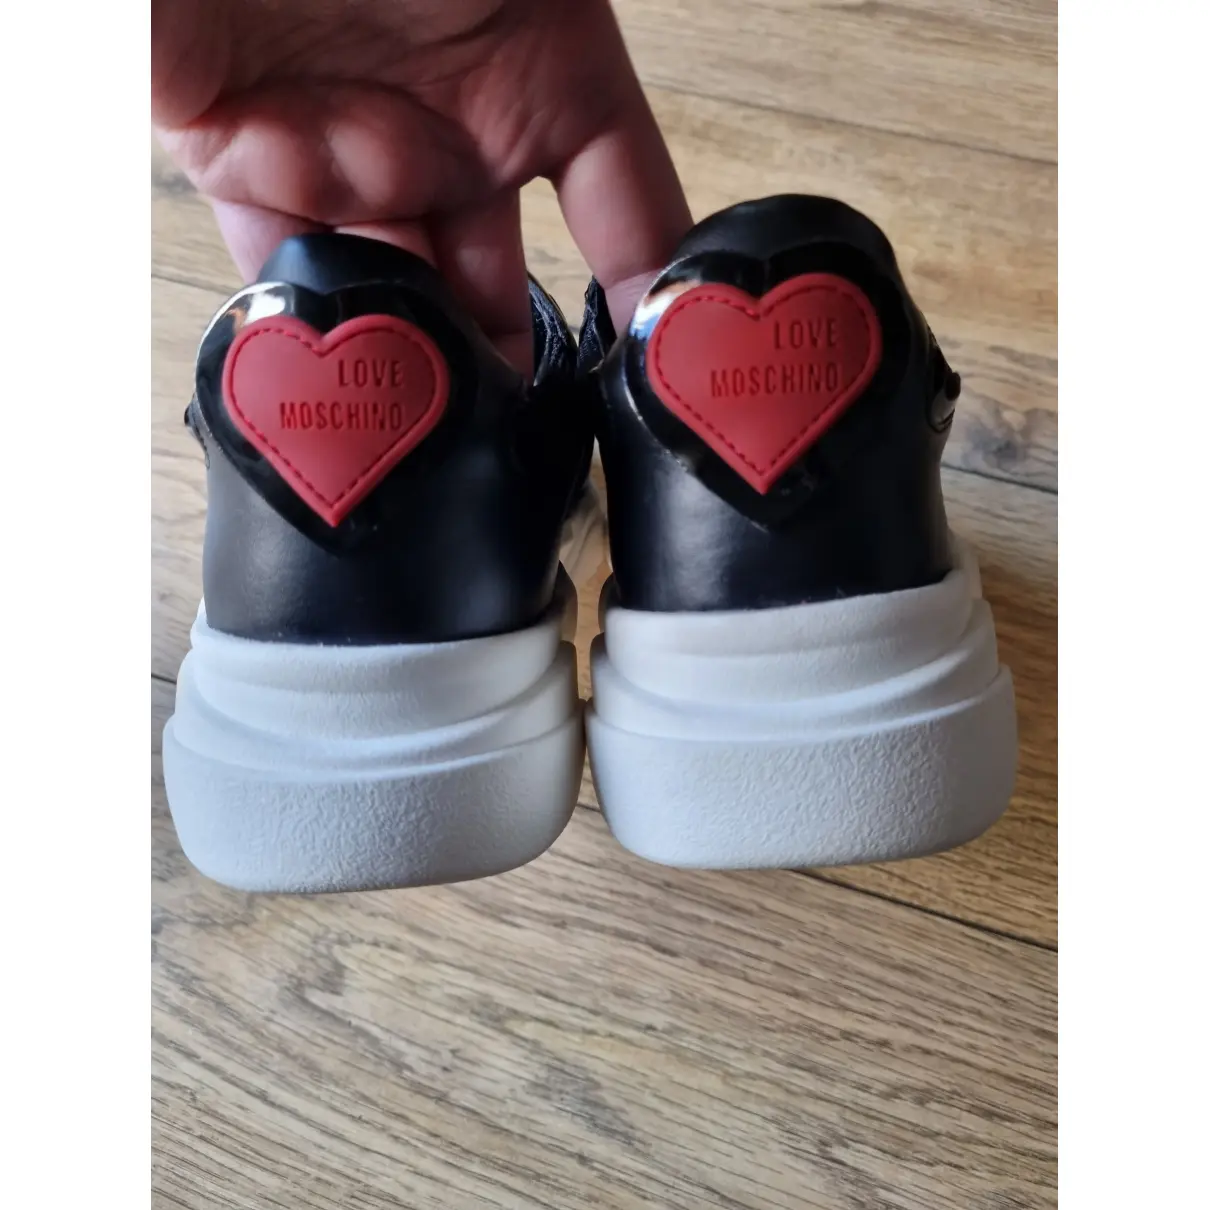 Buy Moschino Love Leather trainers online